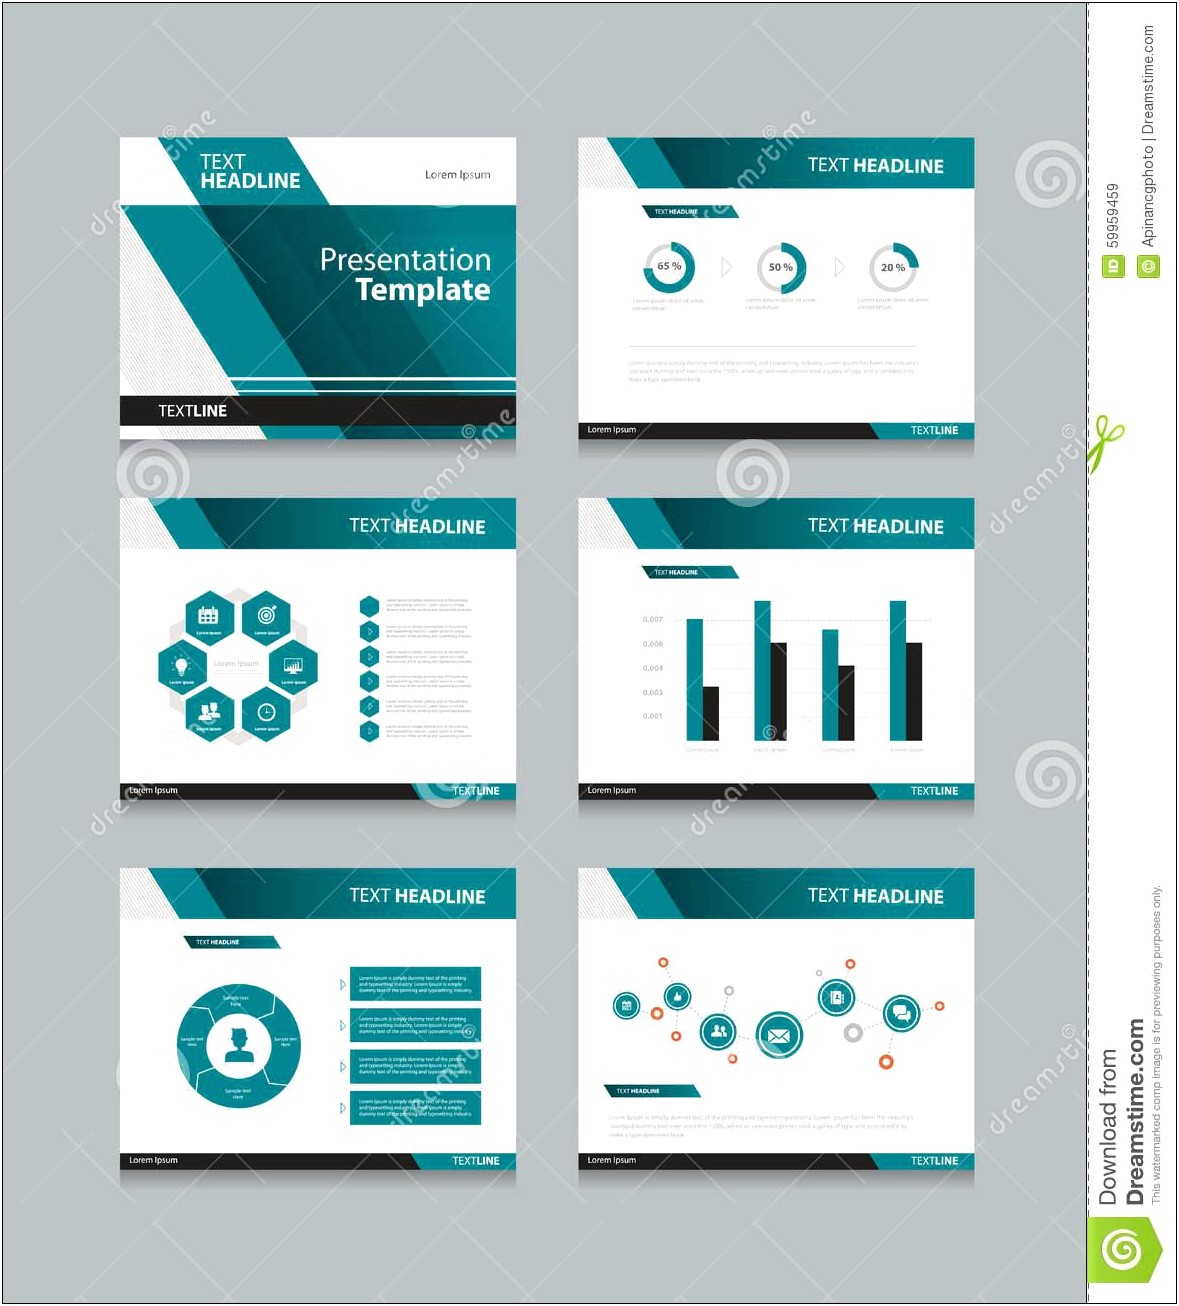 Idea Flat Powerpoint Template Free Download